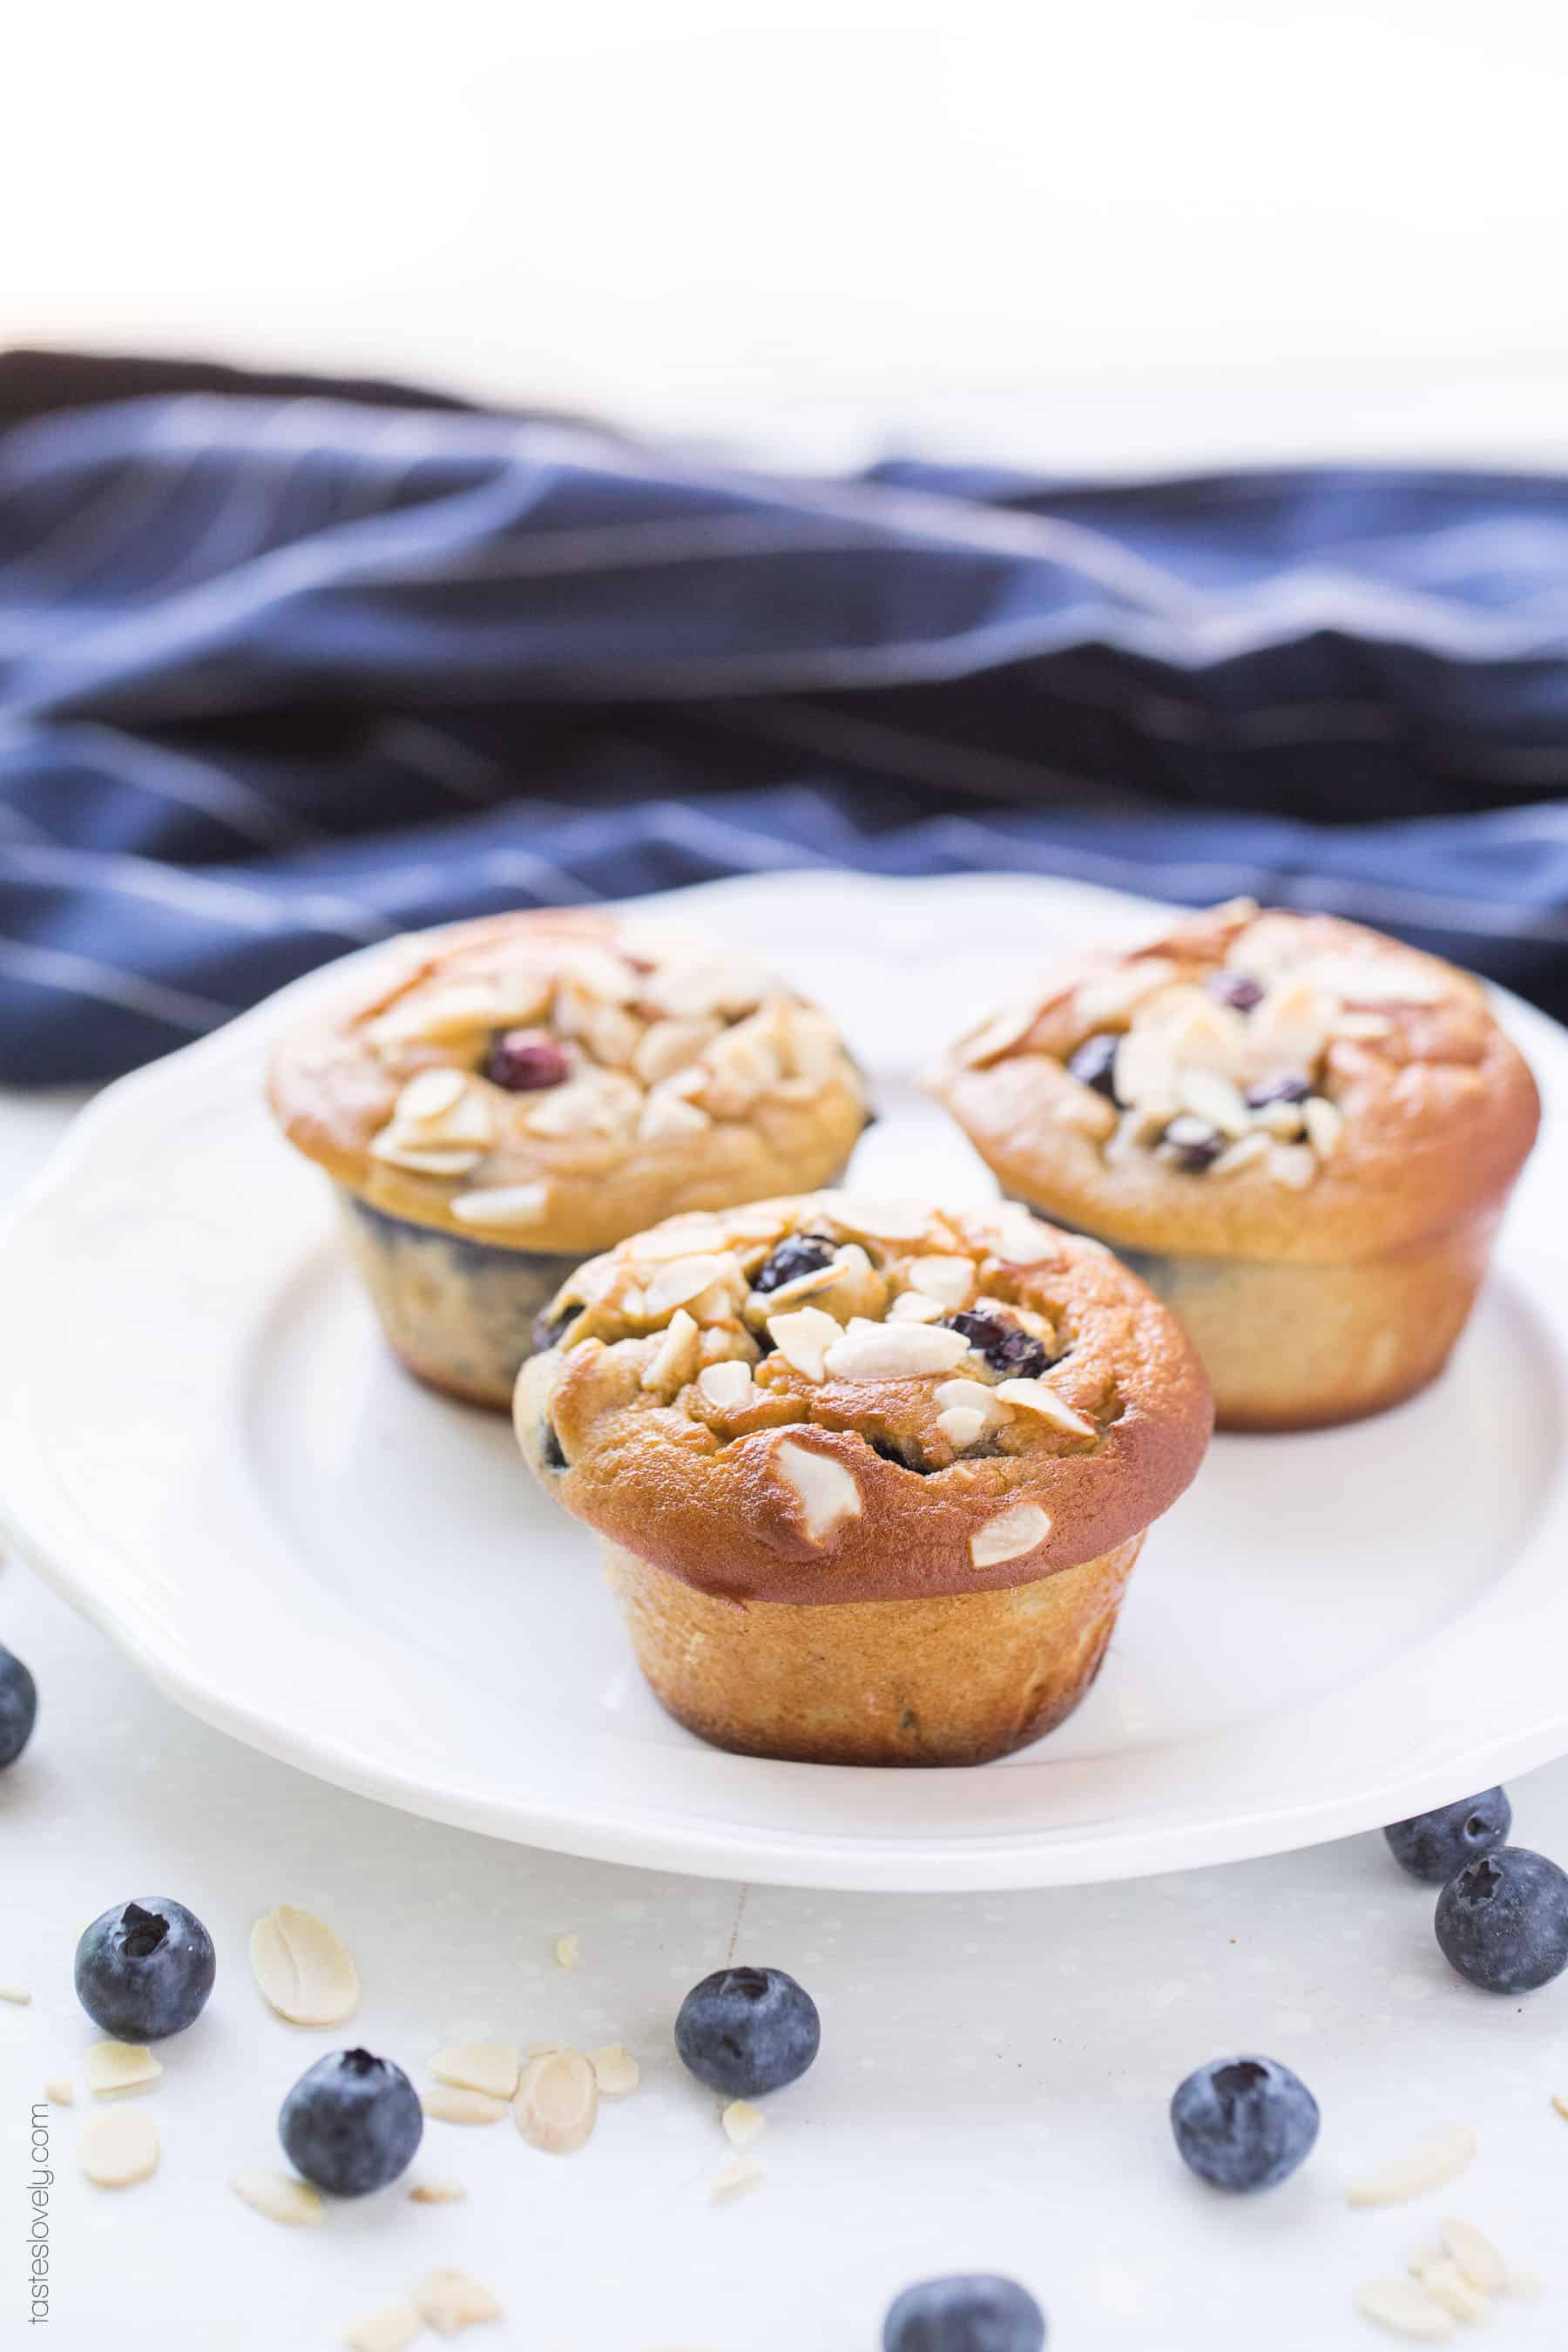 Paleo Blueberry Muffins - made with almond flour and sweetened with banana and coconut sugar. Gluten free, grain free, dairy free, refined sugar free.